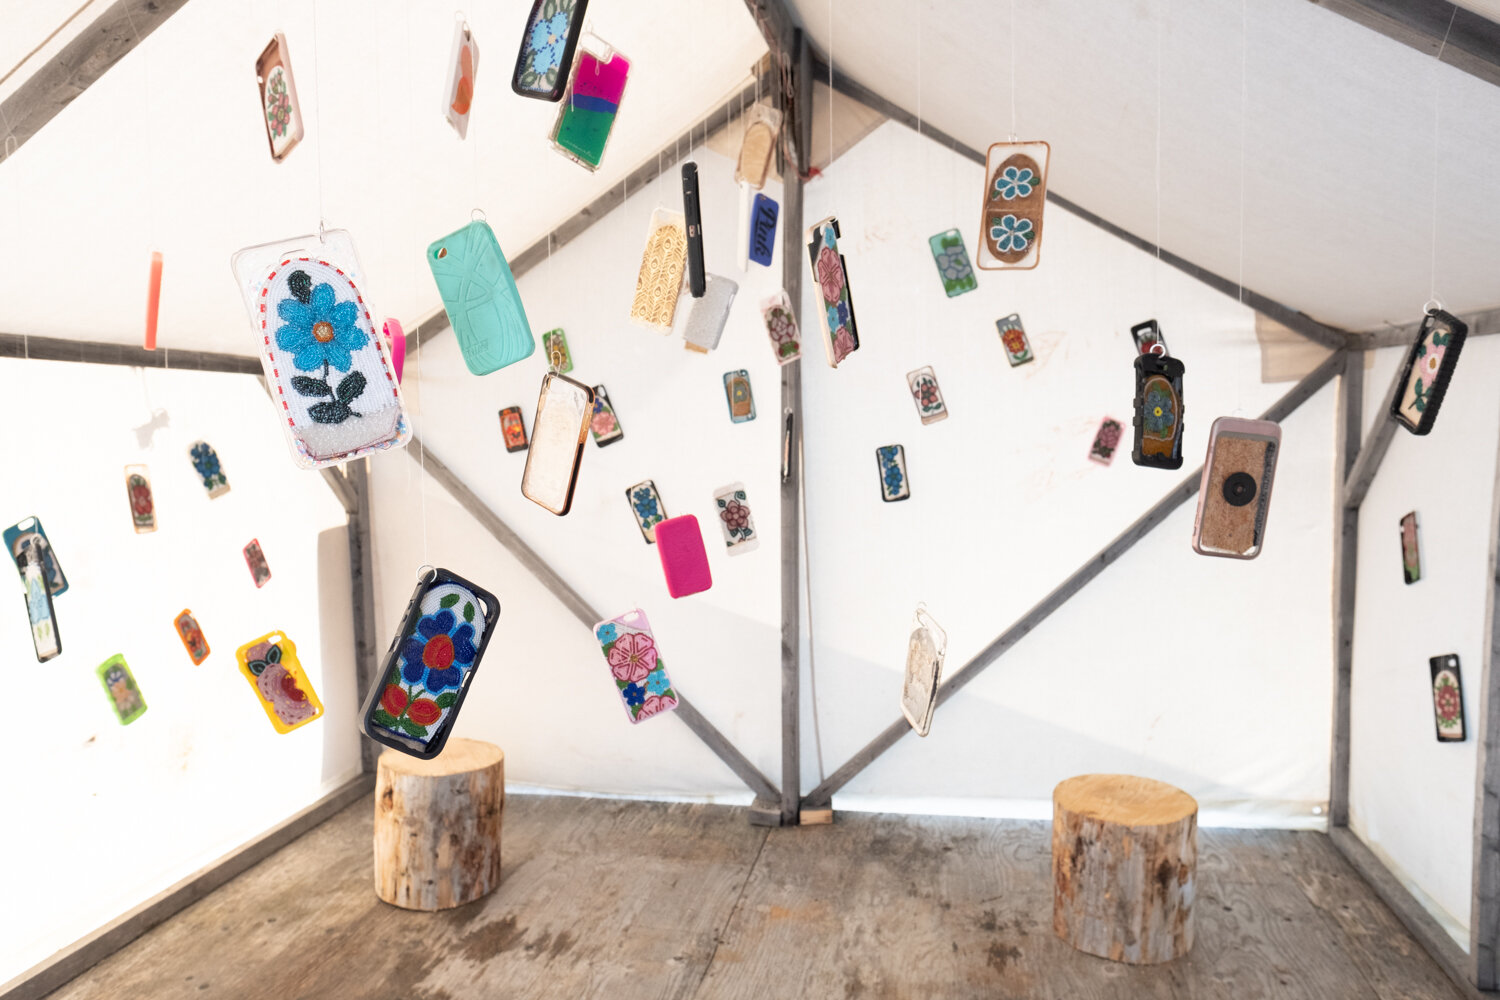   Big Hello  (2021) Beaded uppers, cell phone cases; 112 pieces, Dimensions variable Installation view June 2021, Husky Lakes, NWT  